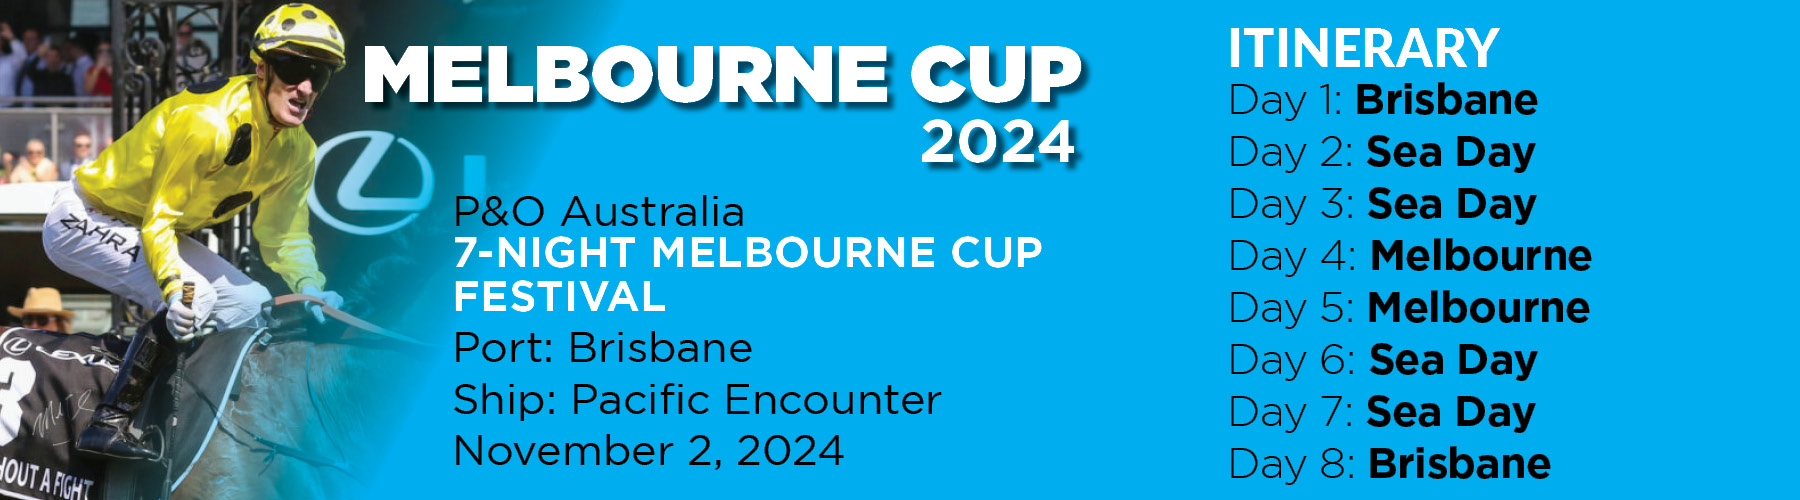 Melbourne Cup Itinerary- Pacific Encounter